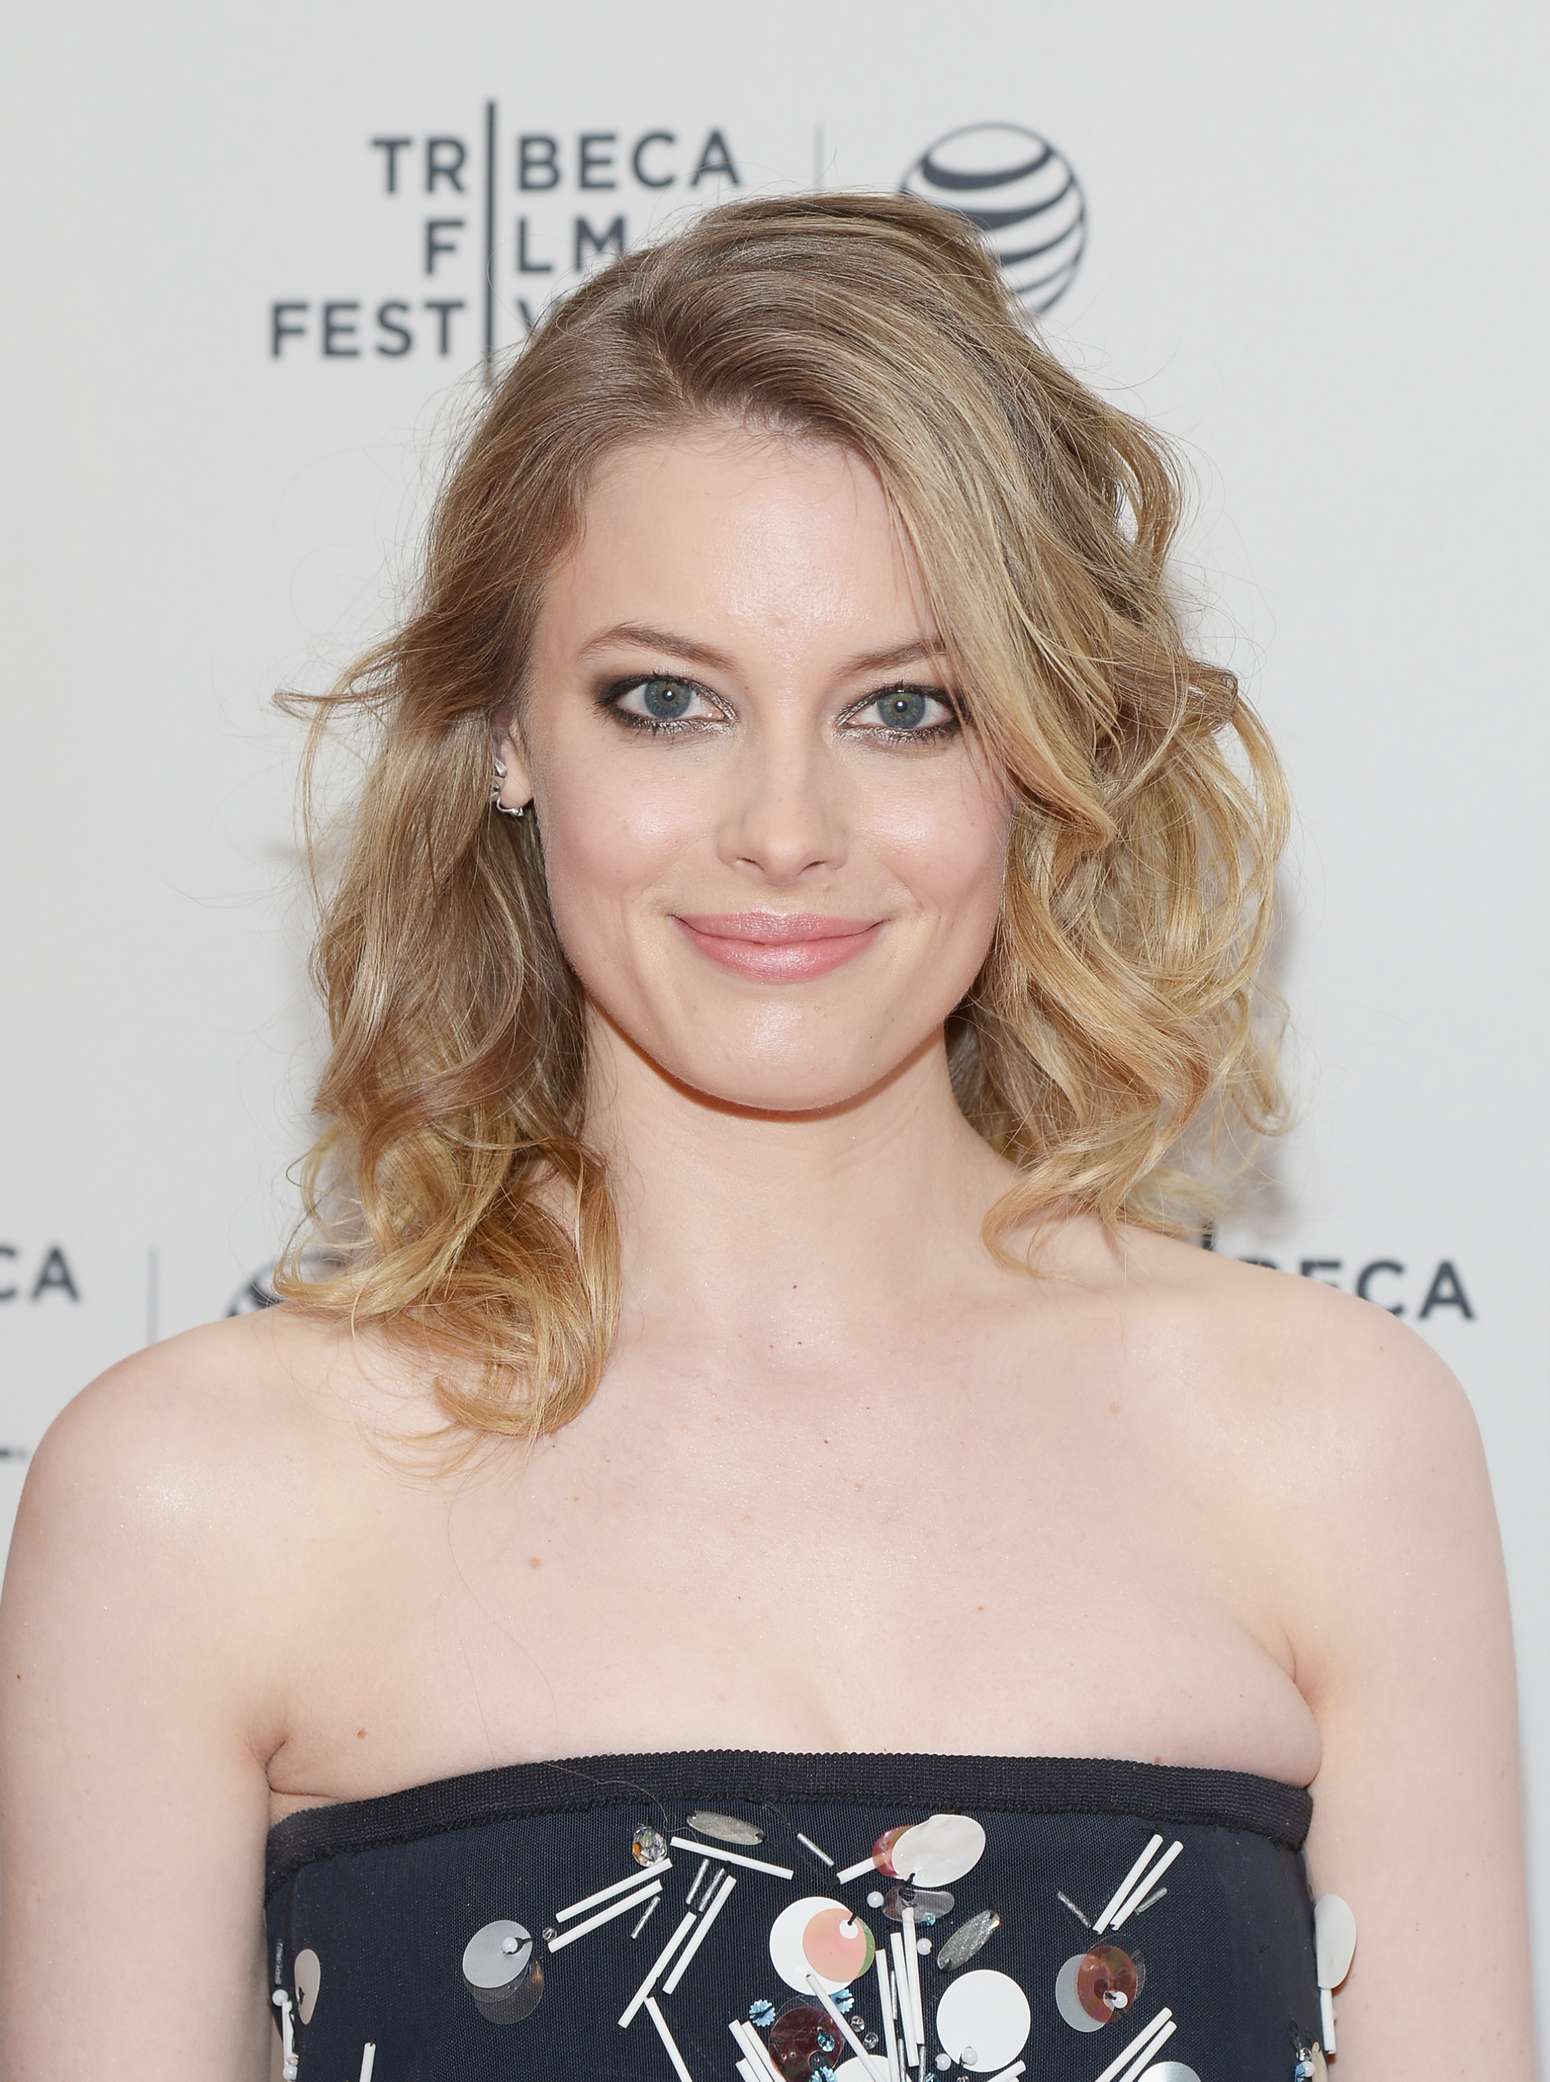 Leighton Meester 2014 : Gillian Jacobs and Leighton Meester: Tribeca Film F...